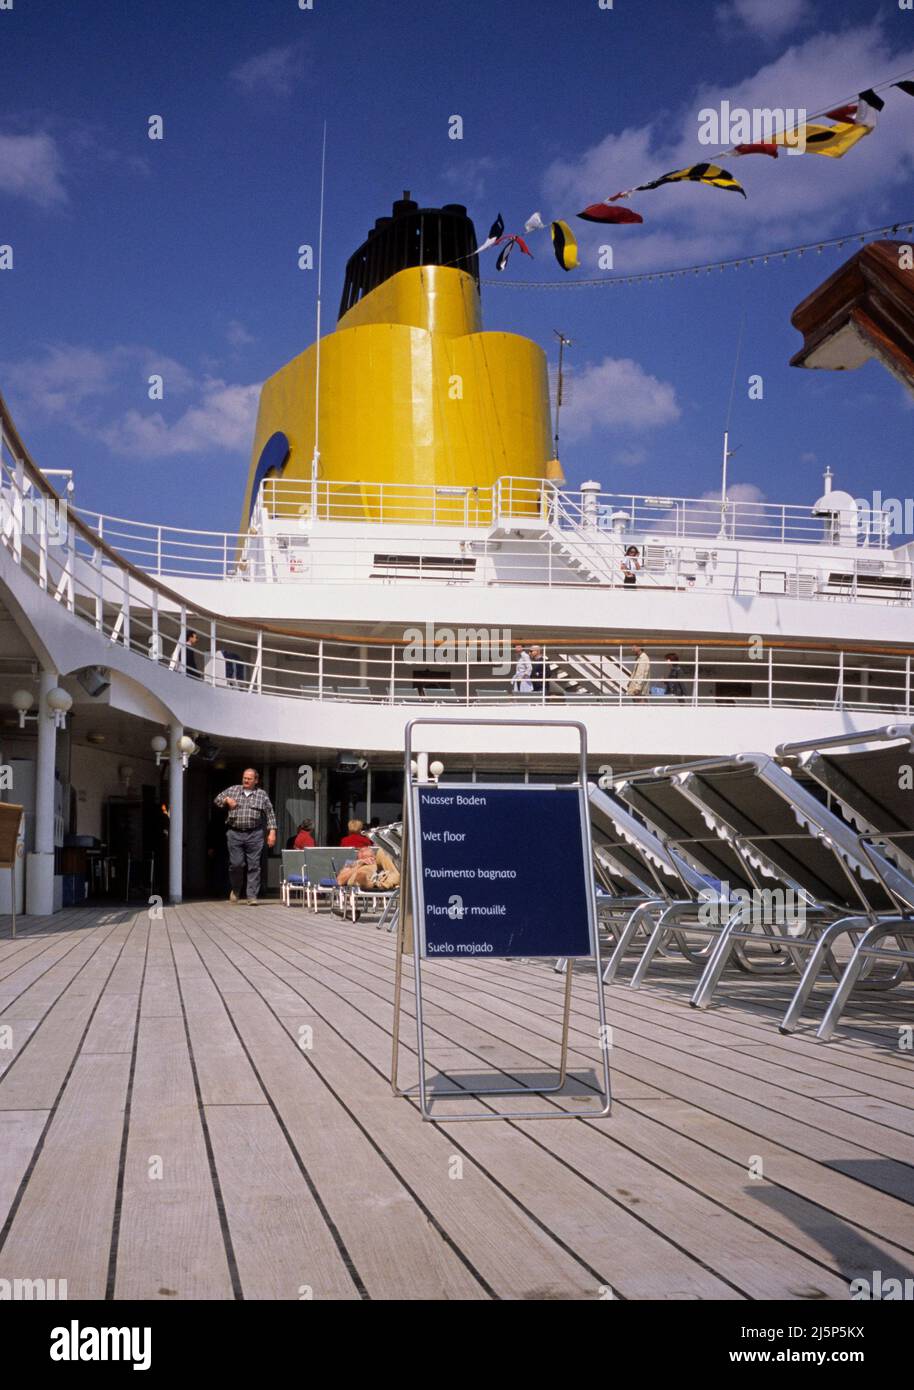 wet floor sign on pool deck of a cruise ship Stock Photo